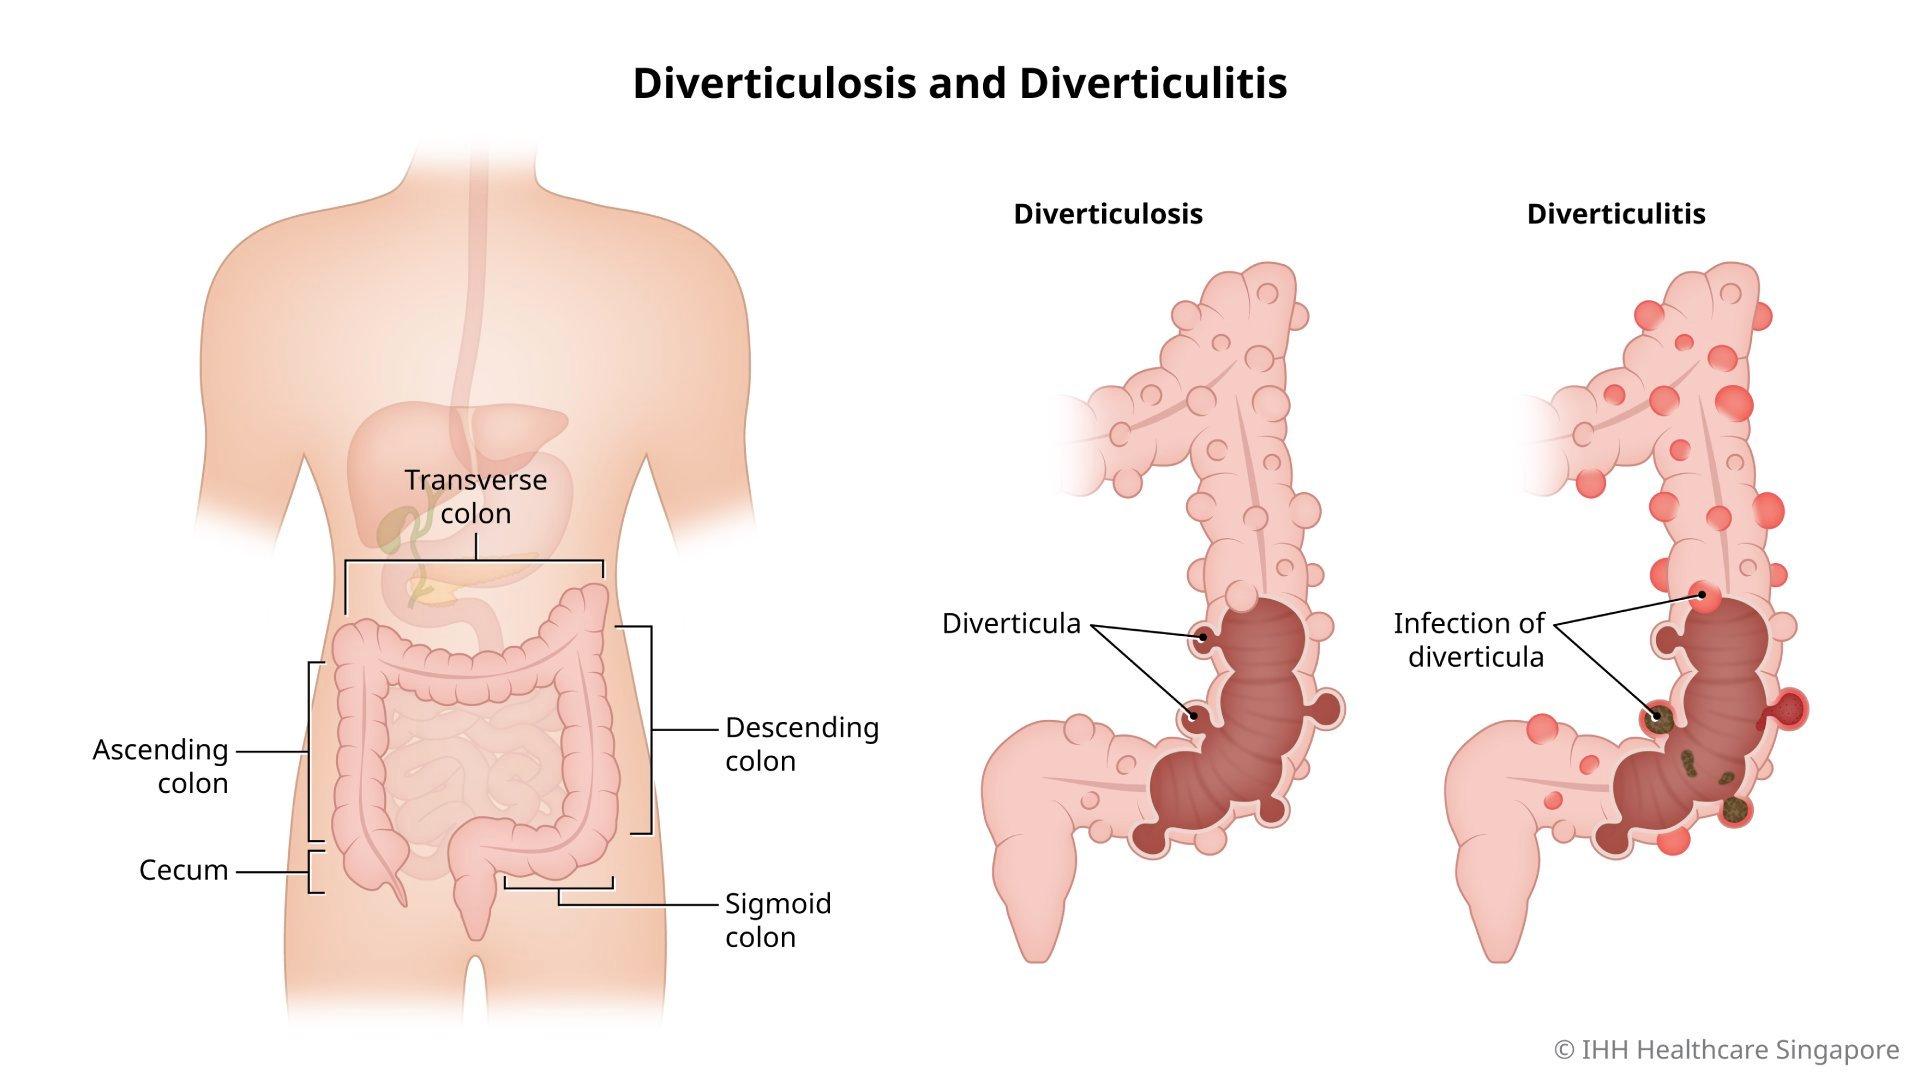 Illustration of the differences between diverticulosis and diverticulitis.